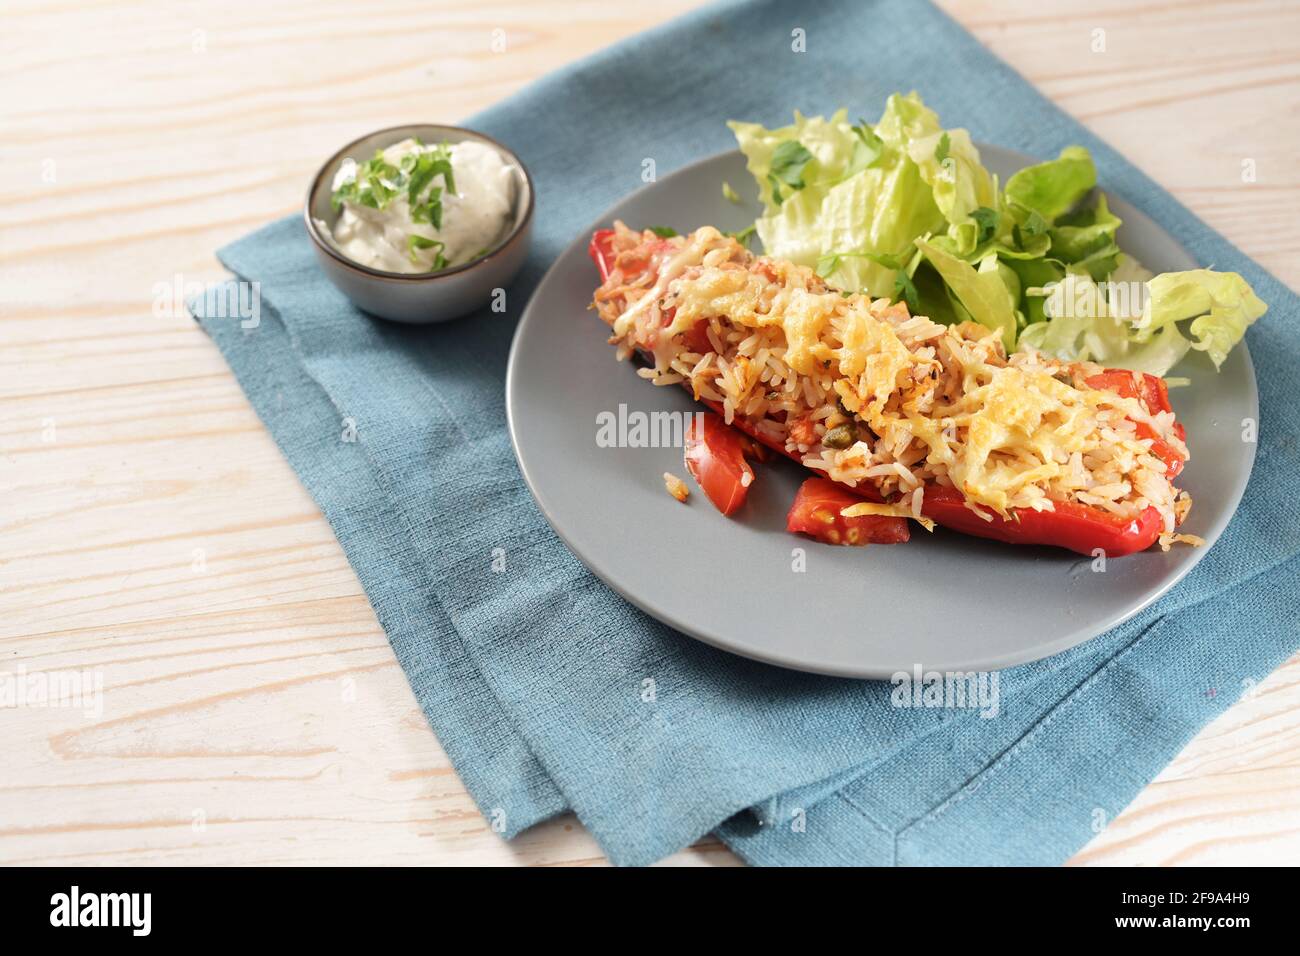 Baked pointed bell pepper stuffed with rice, tuna, tomatoes and cheese on a blue plate with lettuce salad, dip and parsley garnish, napkin and bright Stock Photo